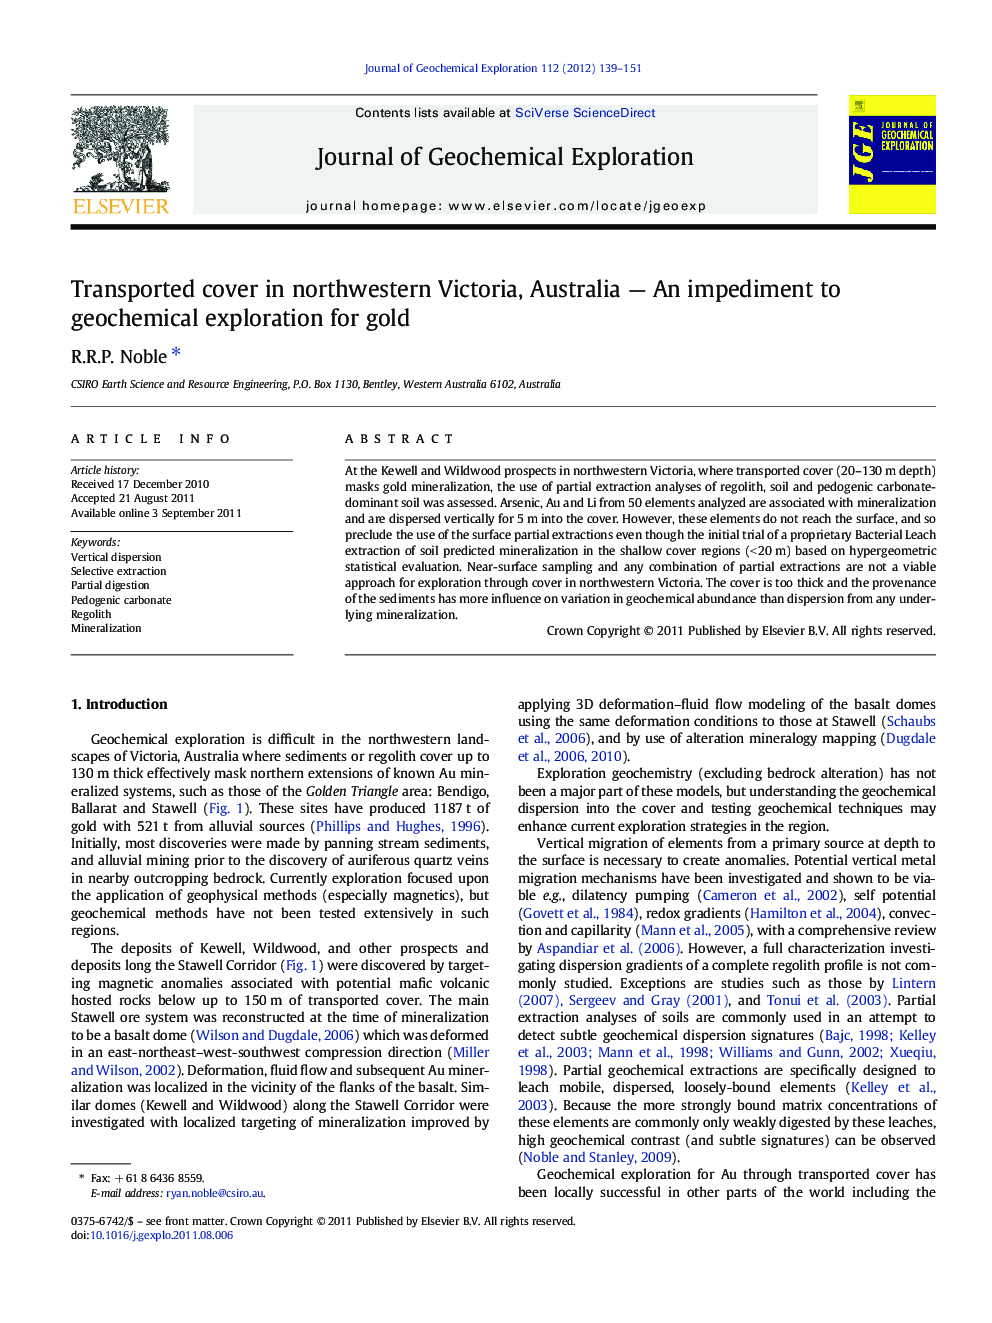 Transported cover in northwestern Victoria, Australia — An impediment to geochemical exploration for gold